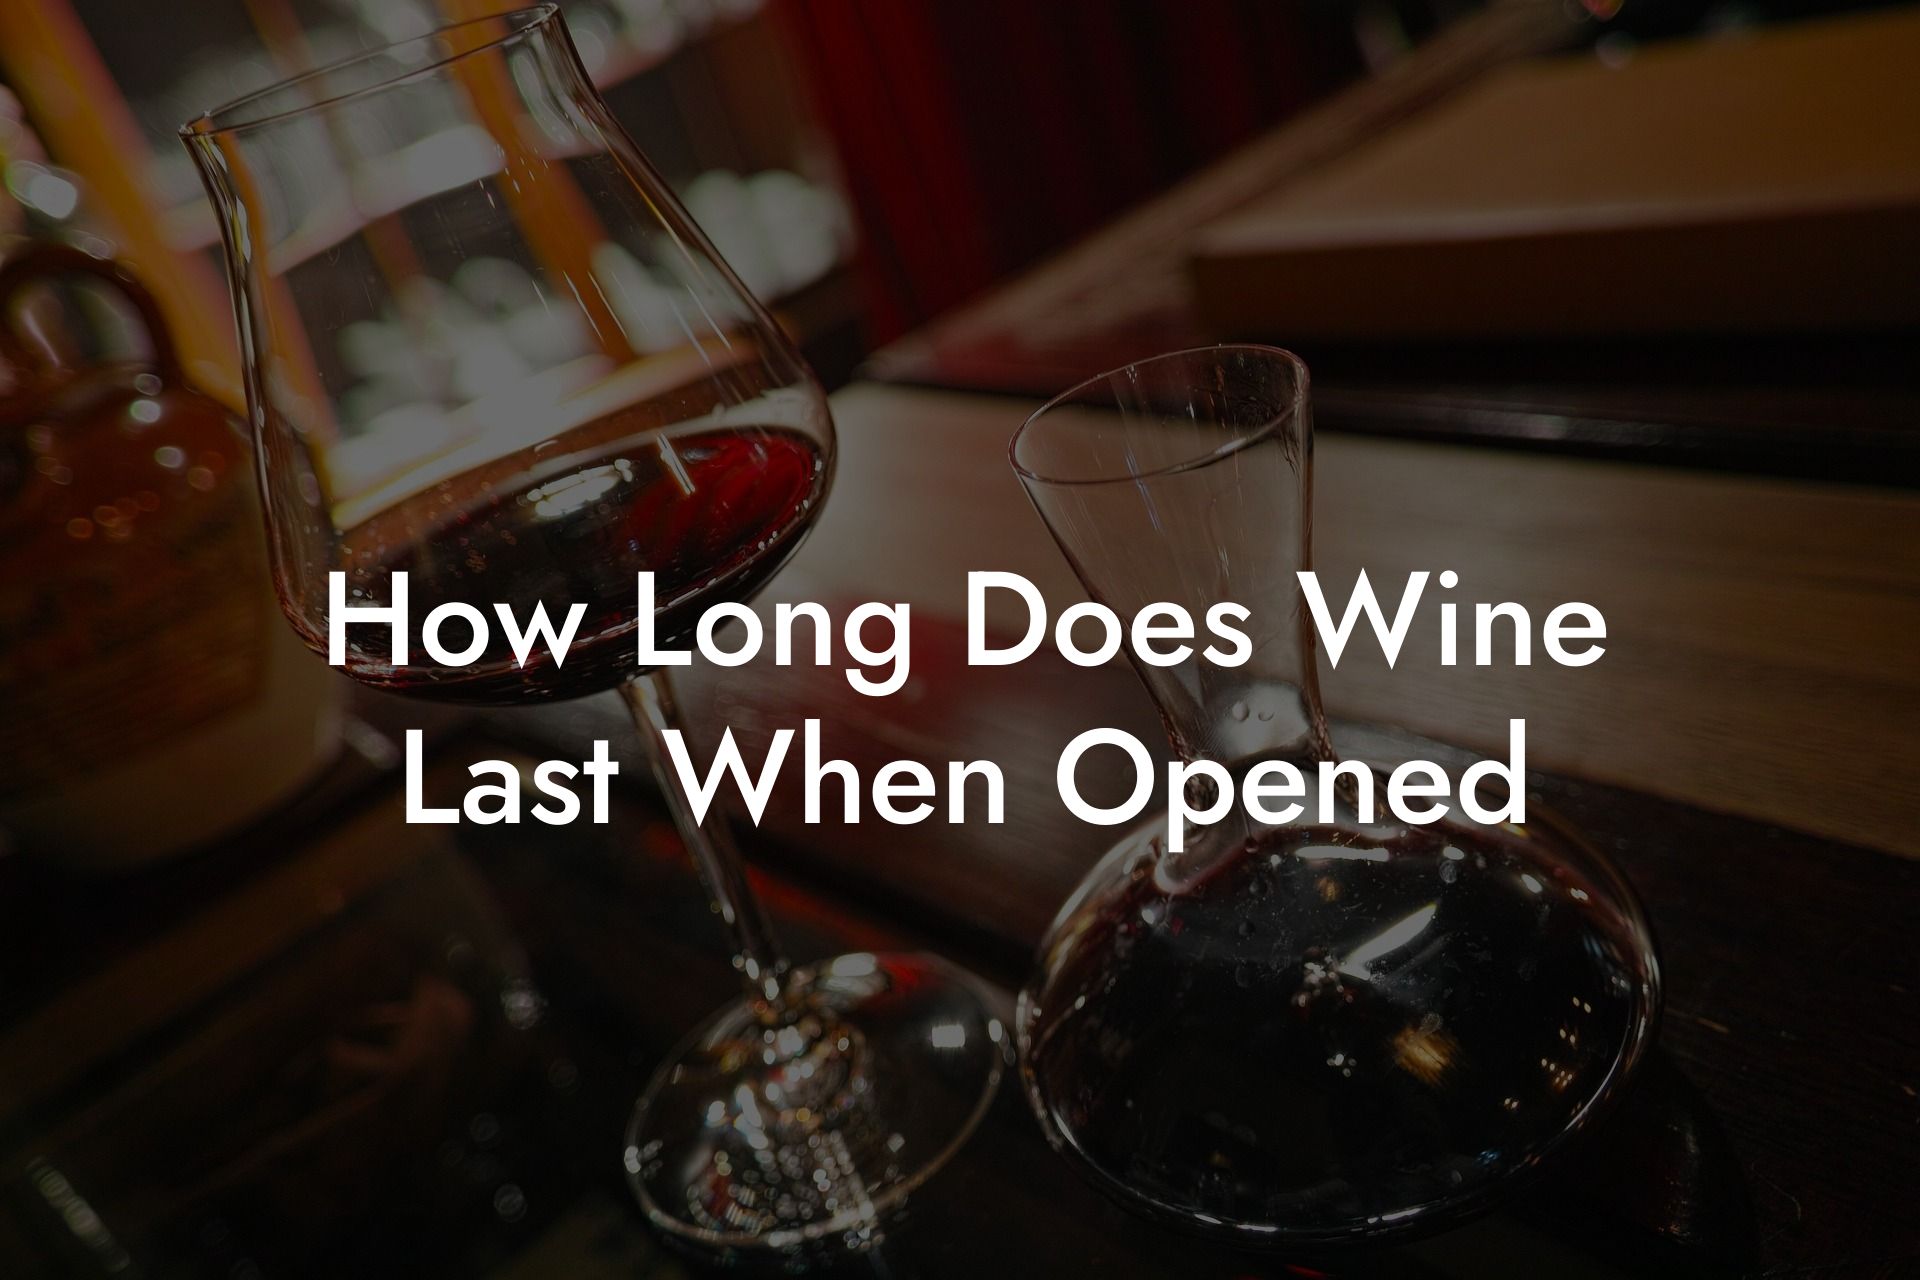 How Long Does Wine Last When Opened